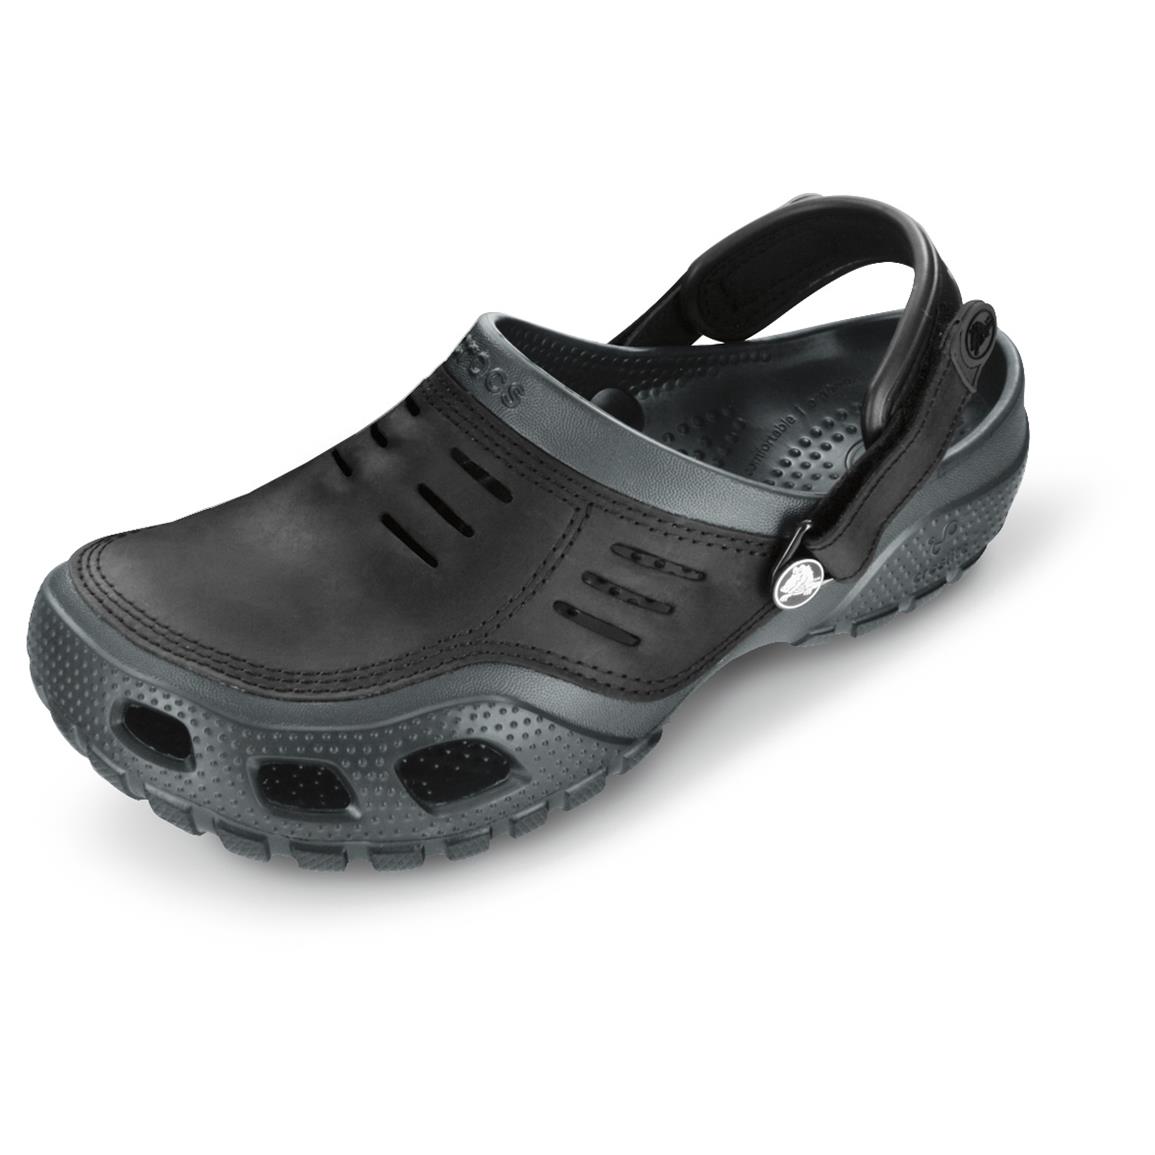 Crocs Yukon Sport Clogs - 651638, Casual Shoes at Sportsman's Guide